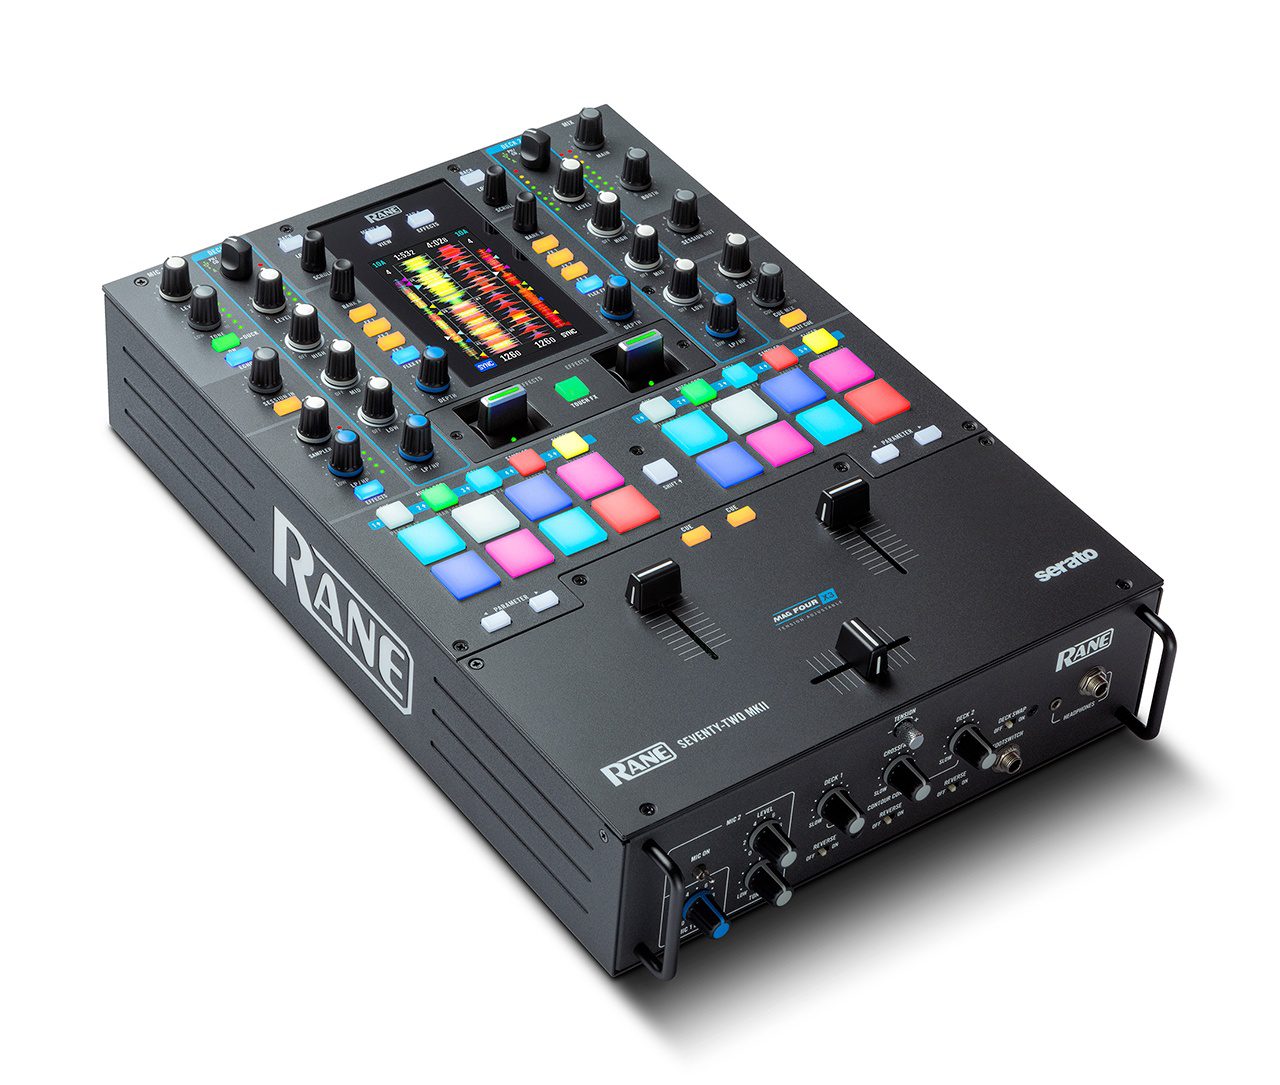 Boasting a more advanced feature set than its predecessor, the Rane Seventy-Two MKII DJ mixer is ready to help you unleash your creative potential. The newest version includes upgrades such as Mag Four faders with external and internal crossfader tension controls, enhanced toggle/sync controls, and dual DVS inputs. It features extensive I/O options with individually assignable USB controller inputs for Rane DJ’s Twelve MKII control systems. The Seventy-Two MKII also carries a 4.3-inch full-color touchscreen for at-a-glance monitoring and FX control. Serato DJs will appreciate just how well this 2-channel mixer integrates with their software. If you’re looking for a knockout new DJ mixer, the Rane Seventy-Two MKII 2-channel DJ mixer definitely won’t disappoint.